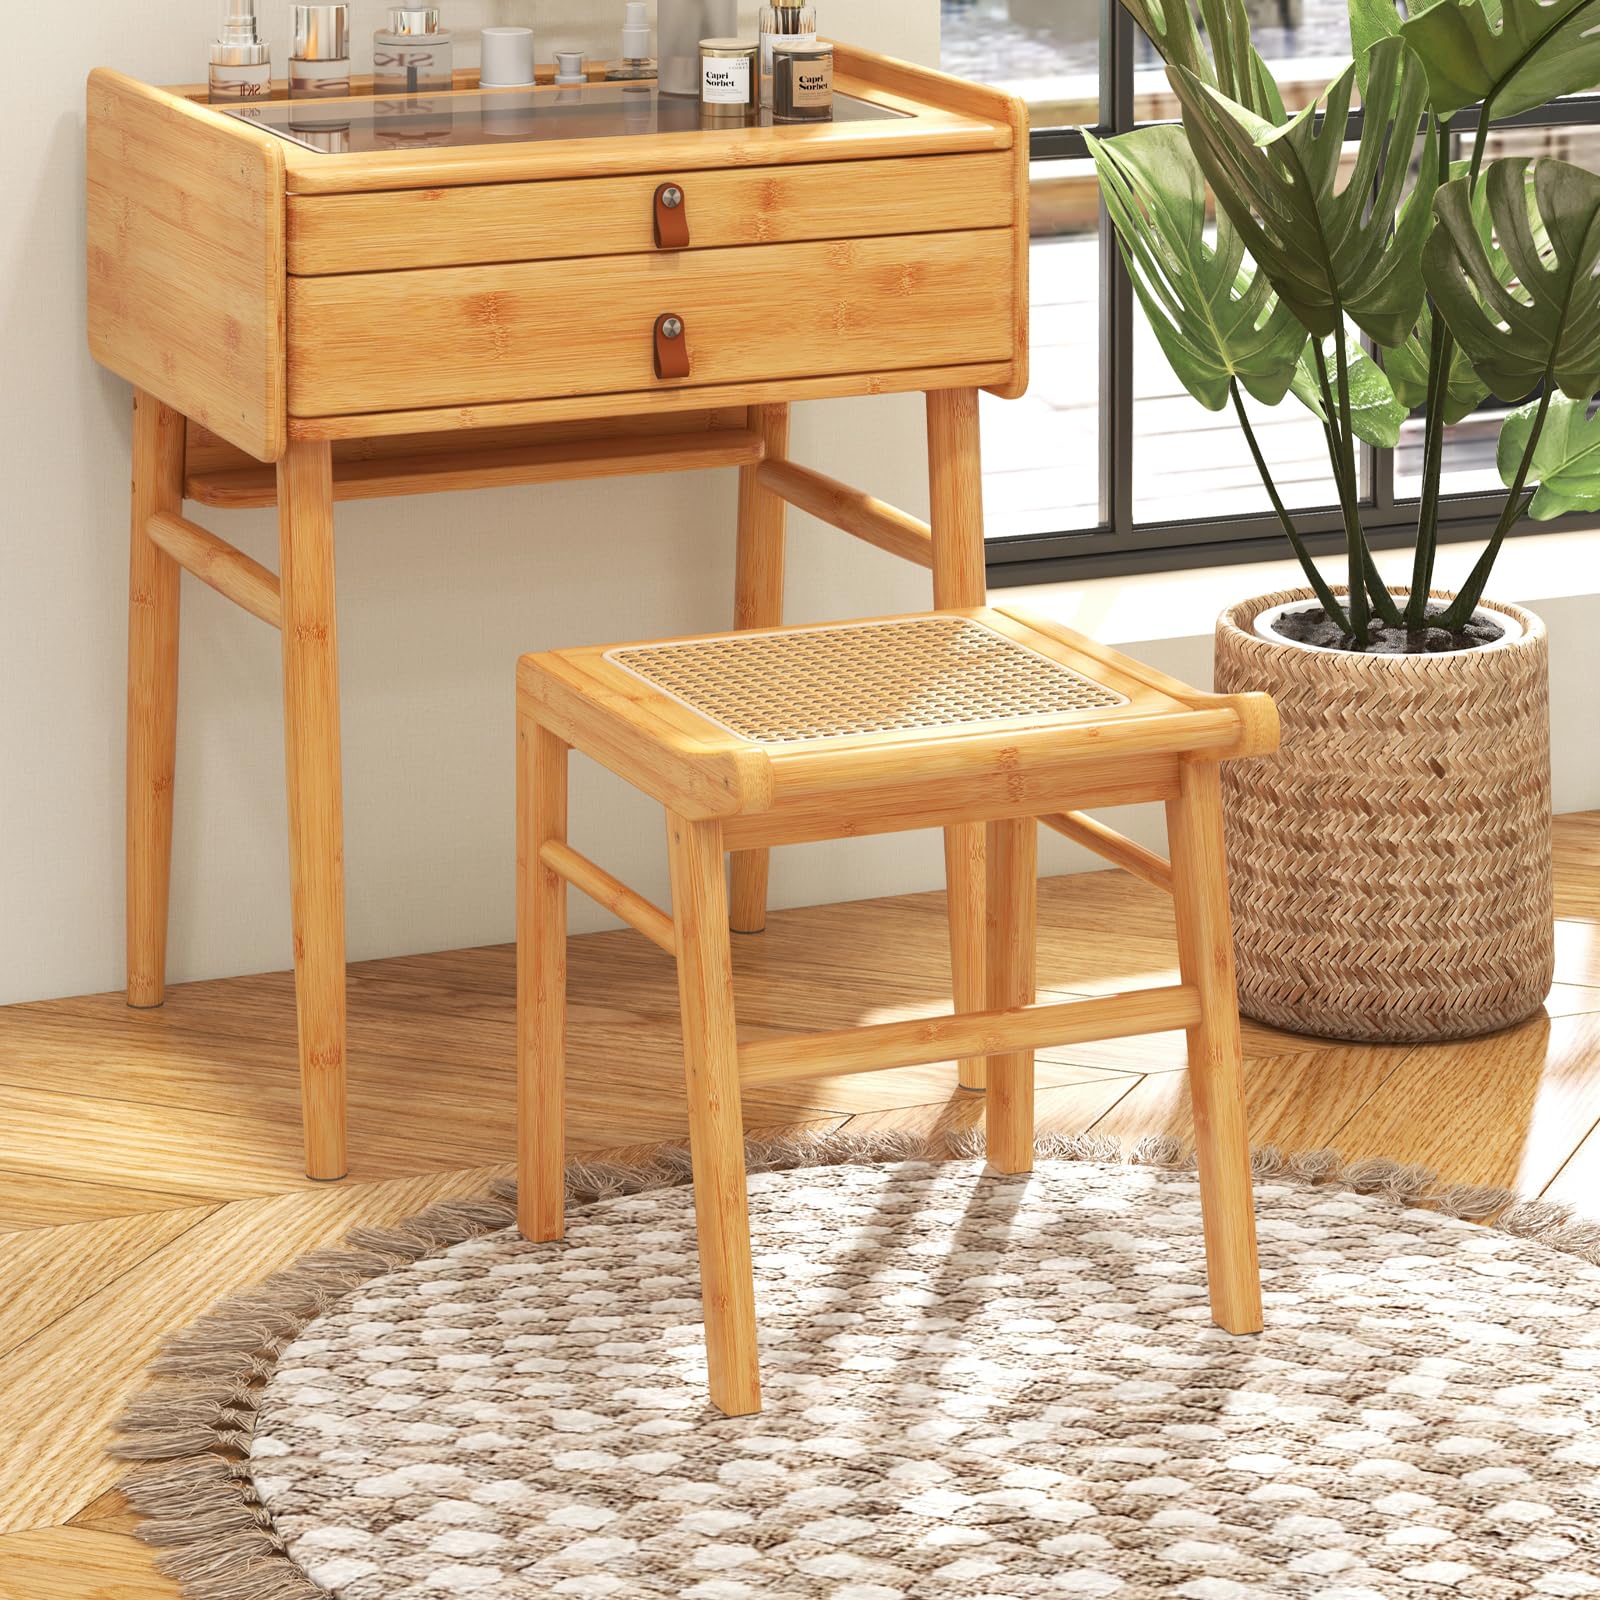 CHARMAID Vanity Stool, Bamboo Ottoman Foot Rest with Rattan Seat, Anti-Slip Foot Pads